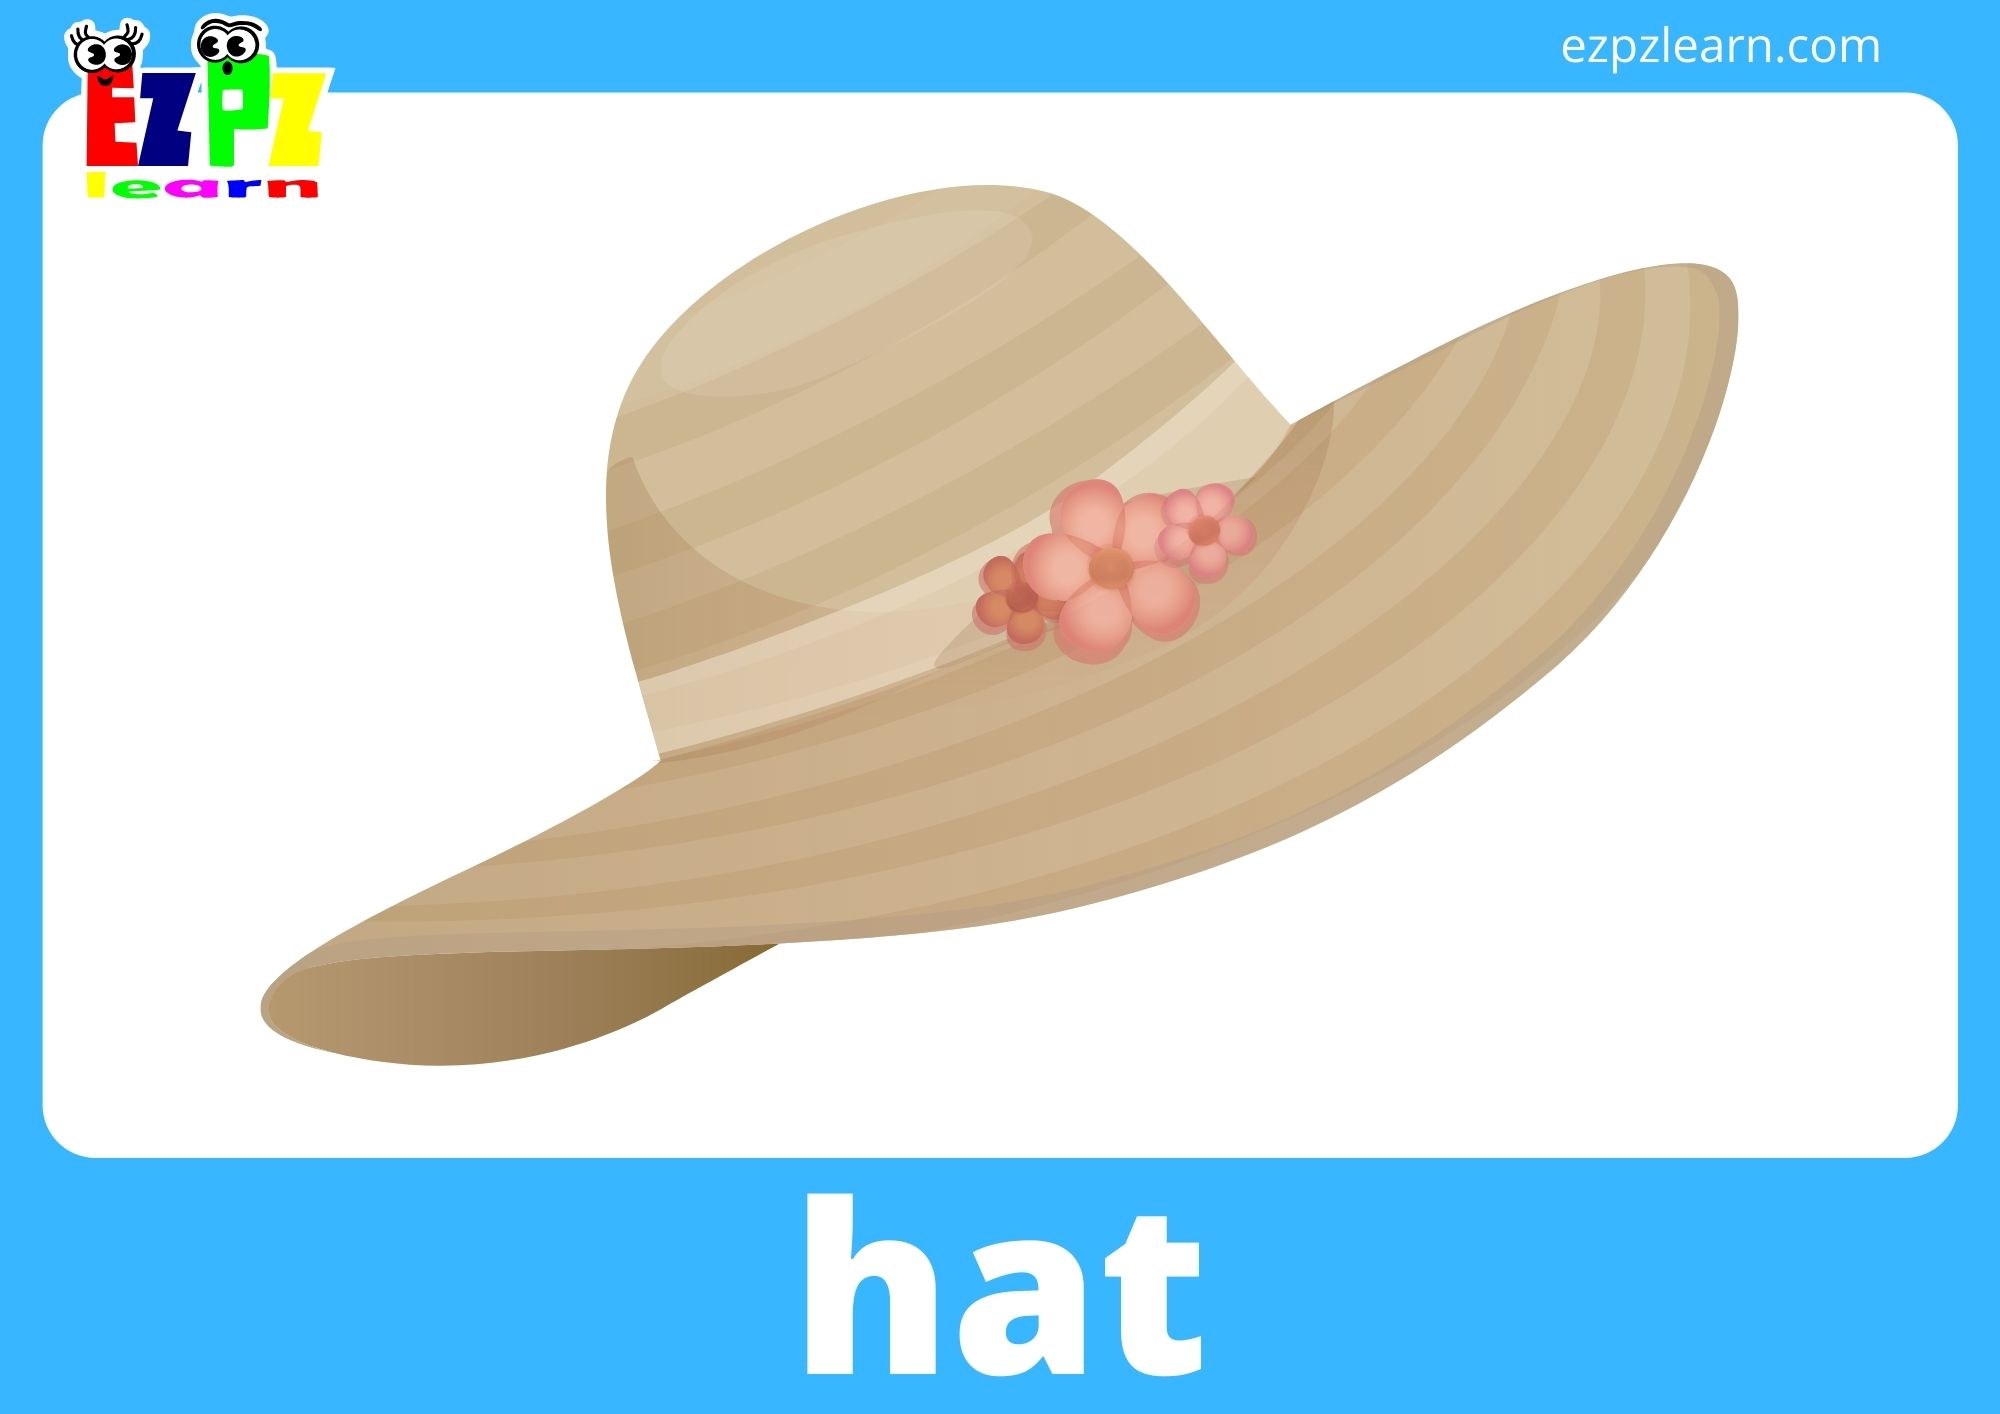 Summer Clothes Vocabulary Flashcards